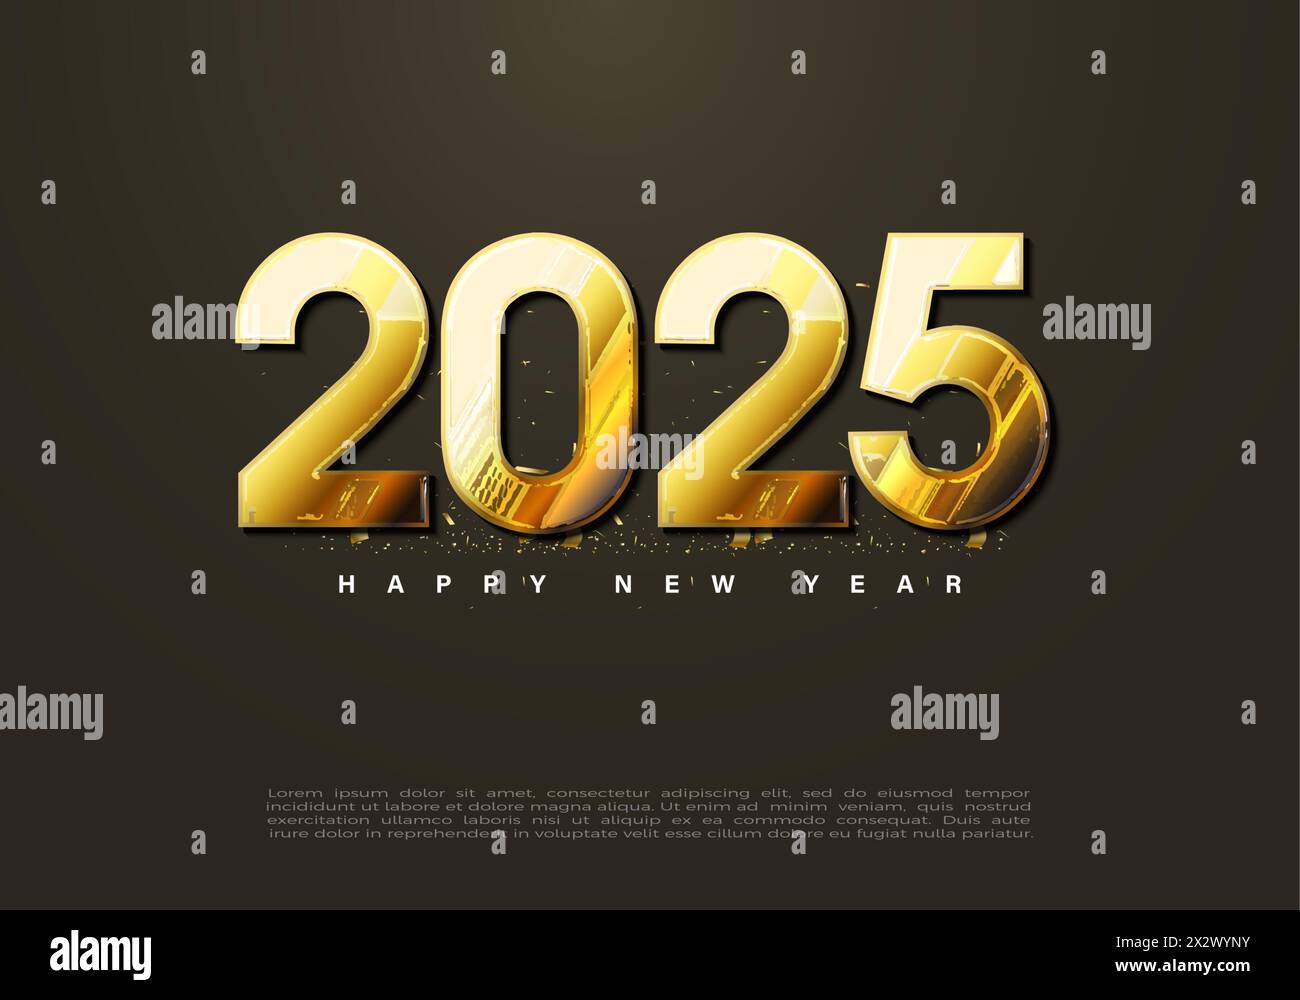 happy new year 2025 design. with elegant, simple colored number illustrations. premium vector design for posters, banners and greetings. Stock Vector